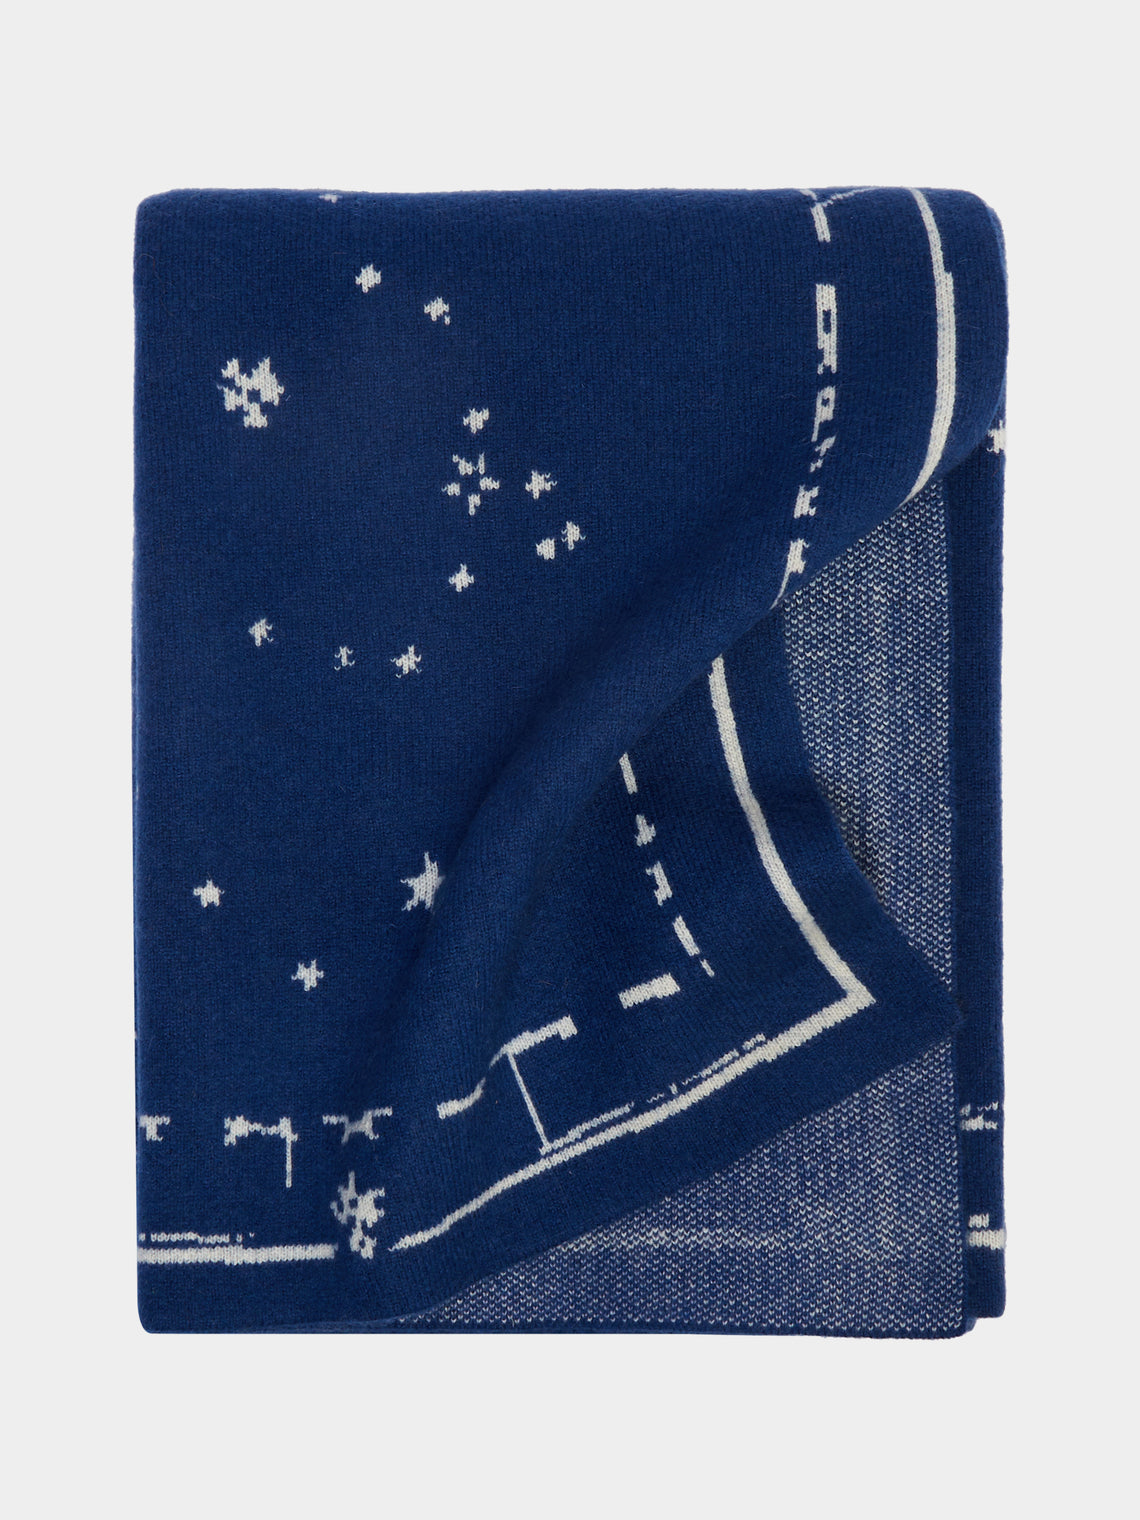 Saved NY - Constellation Cashmere Throw -  - ABASK - 